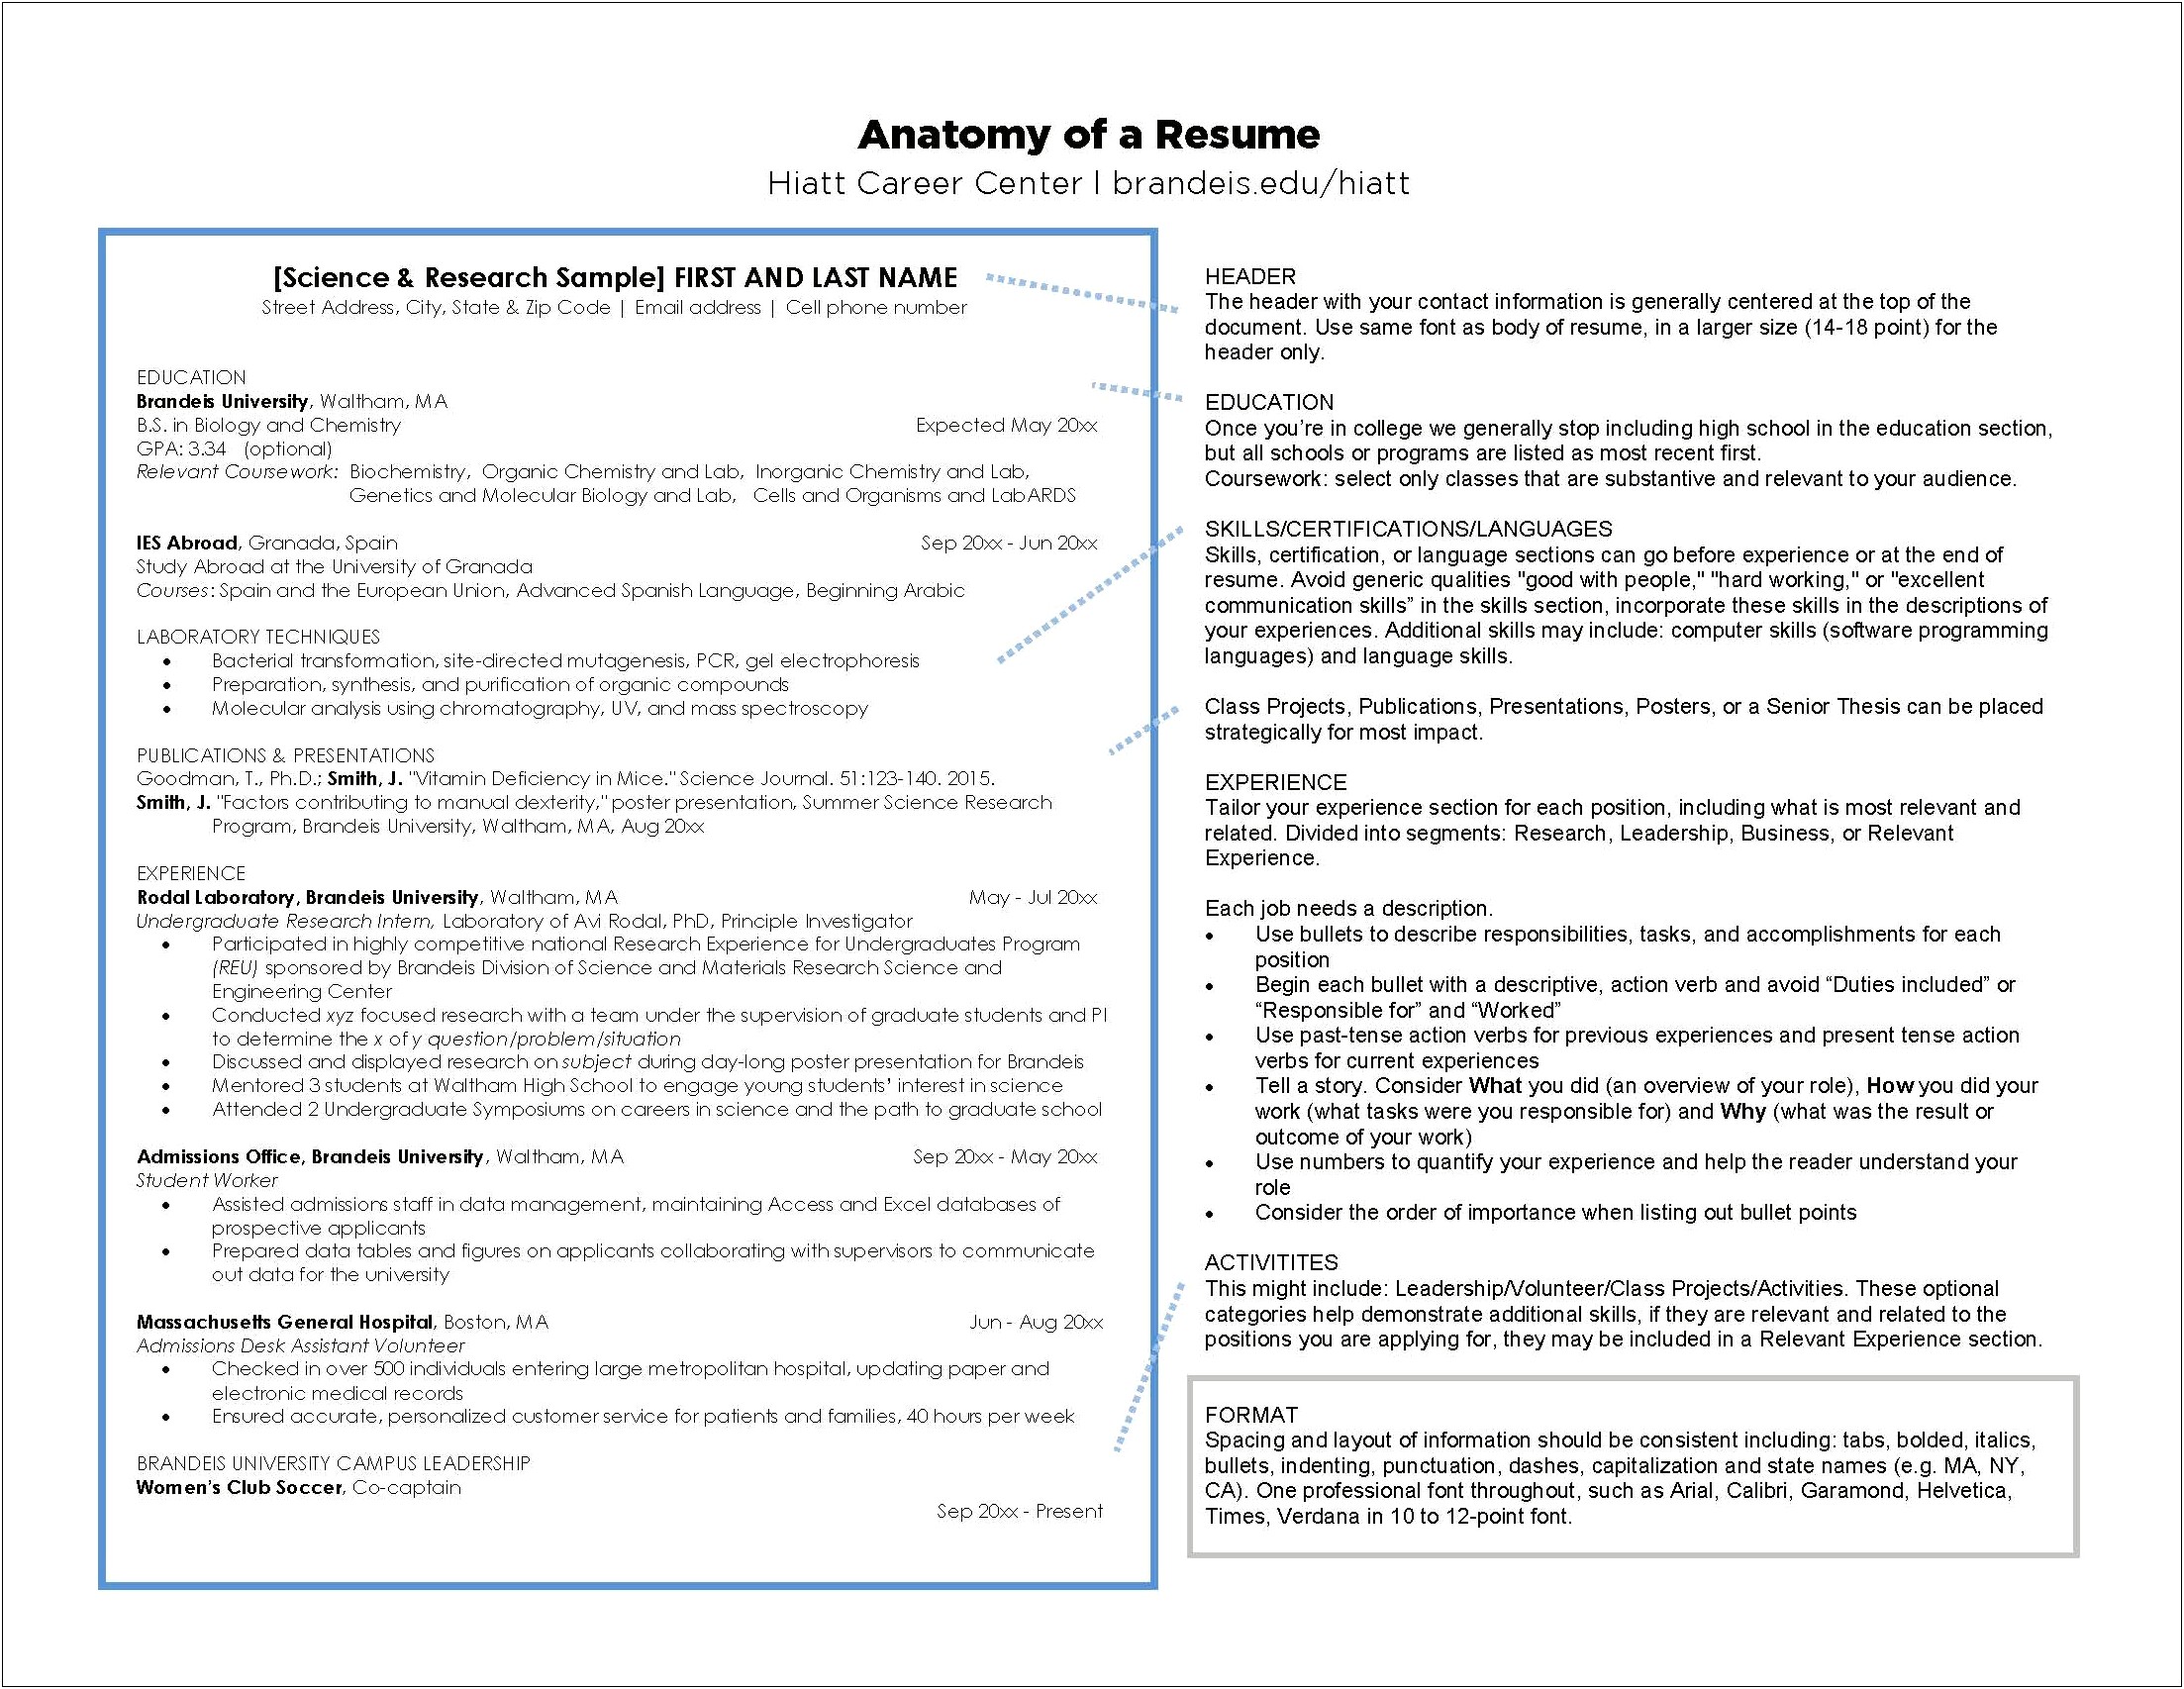 Resume Of Applicant's Activities And Experience Layout